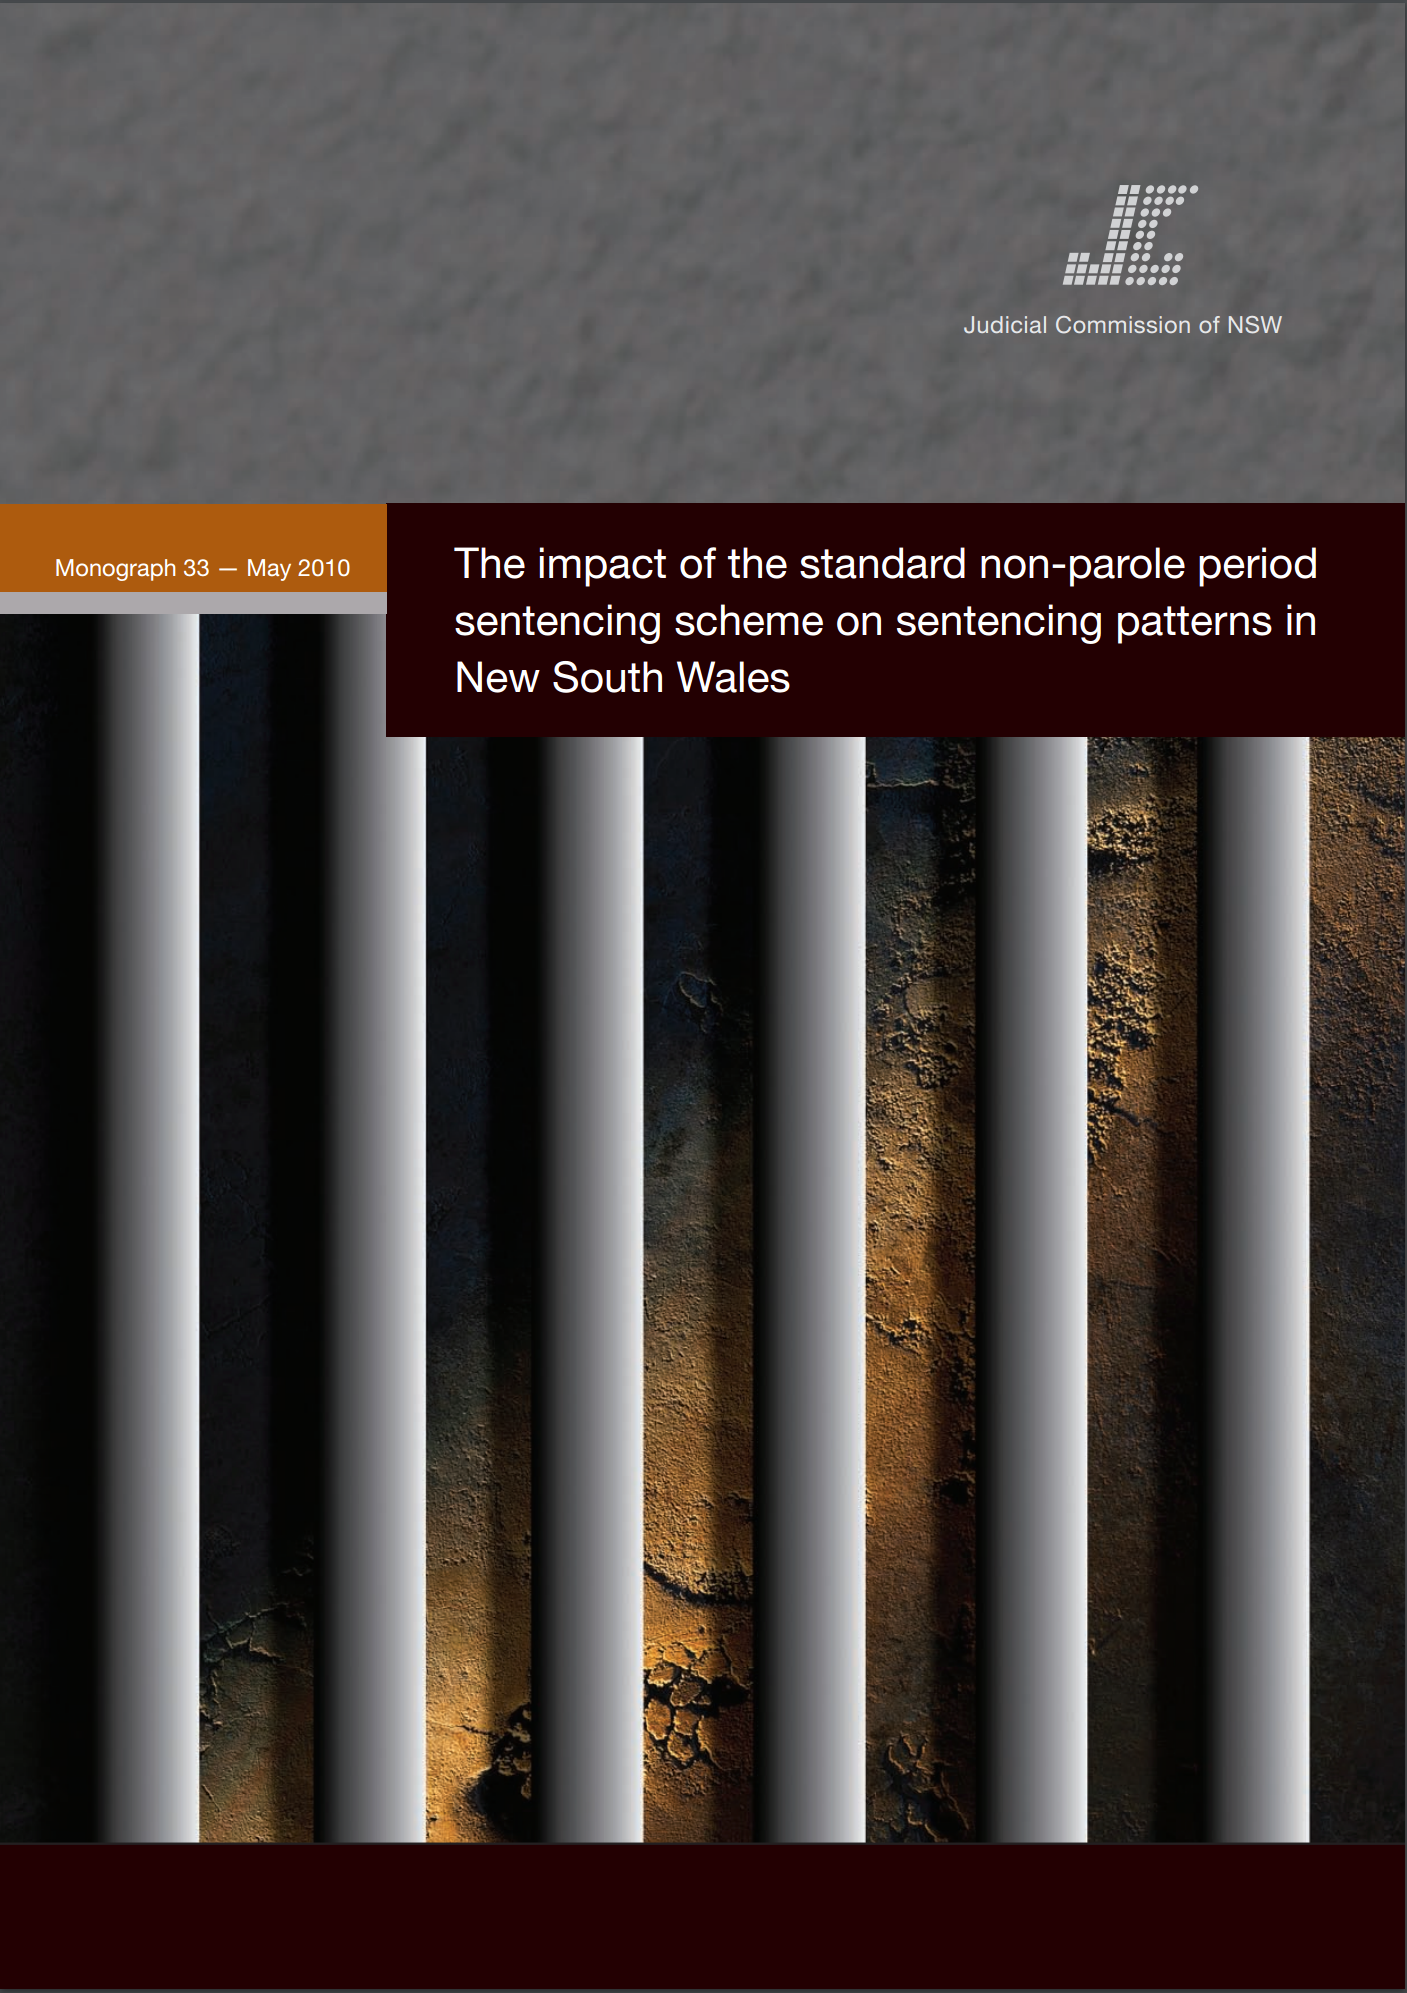 Research Monograph 33 Cover - The Impact of the standard non-parole period sentencing scheme on sentencing patterns in New South Wales